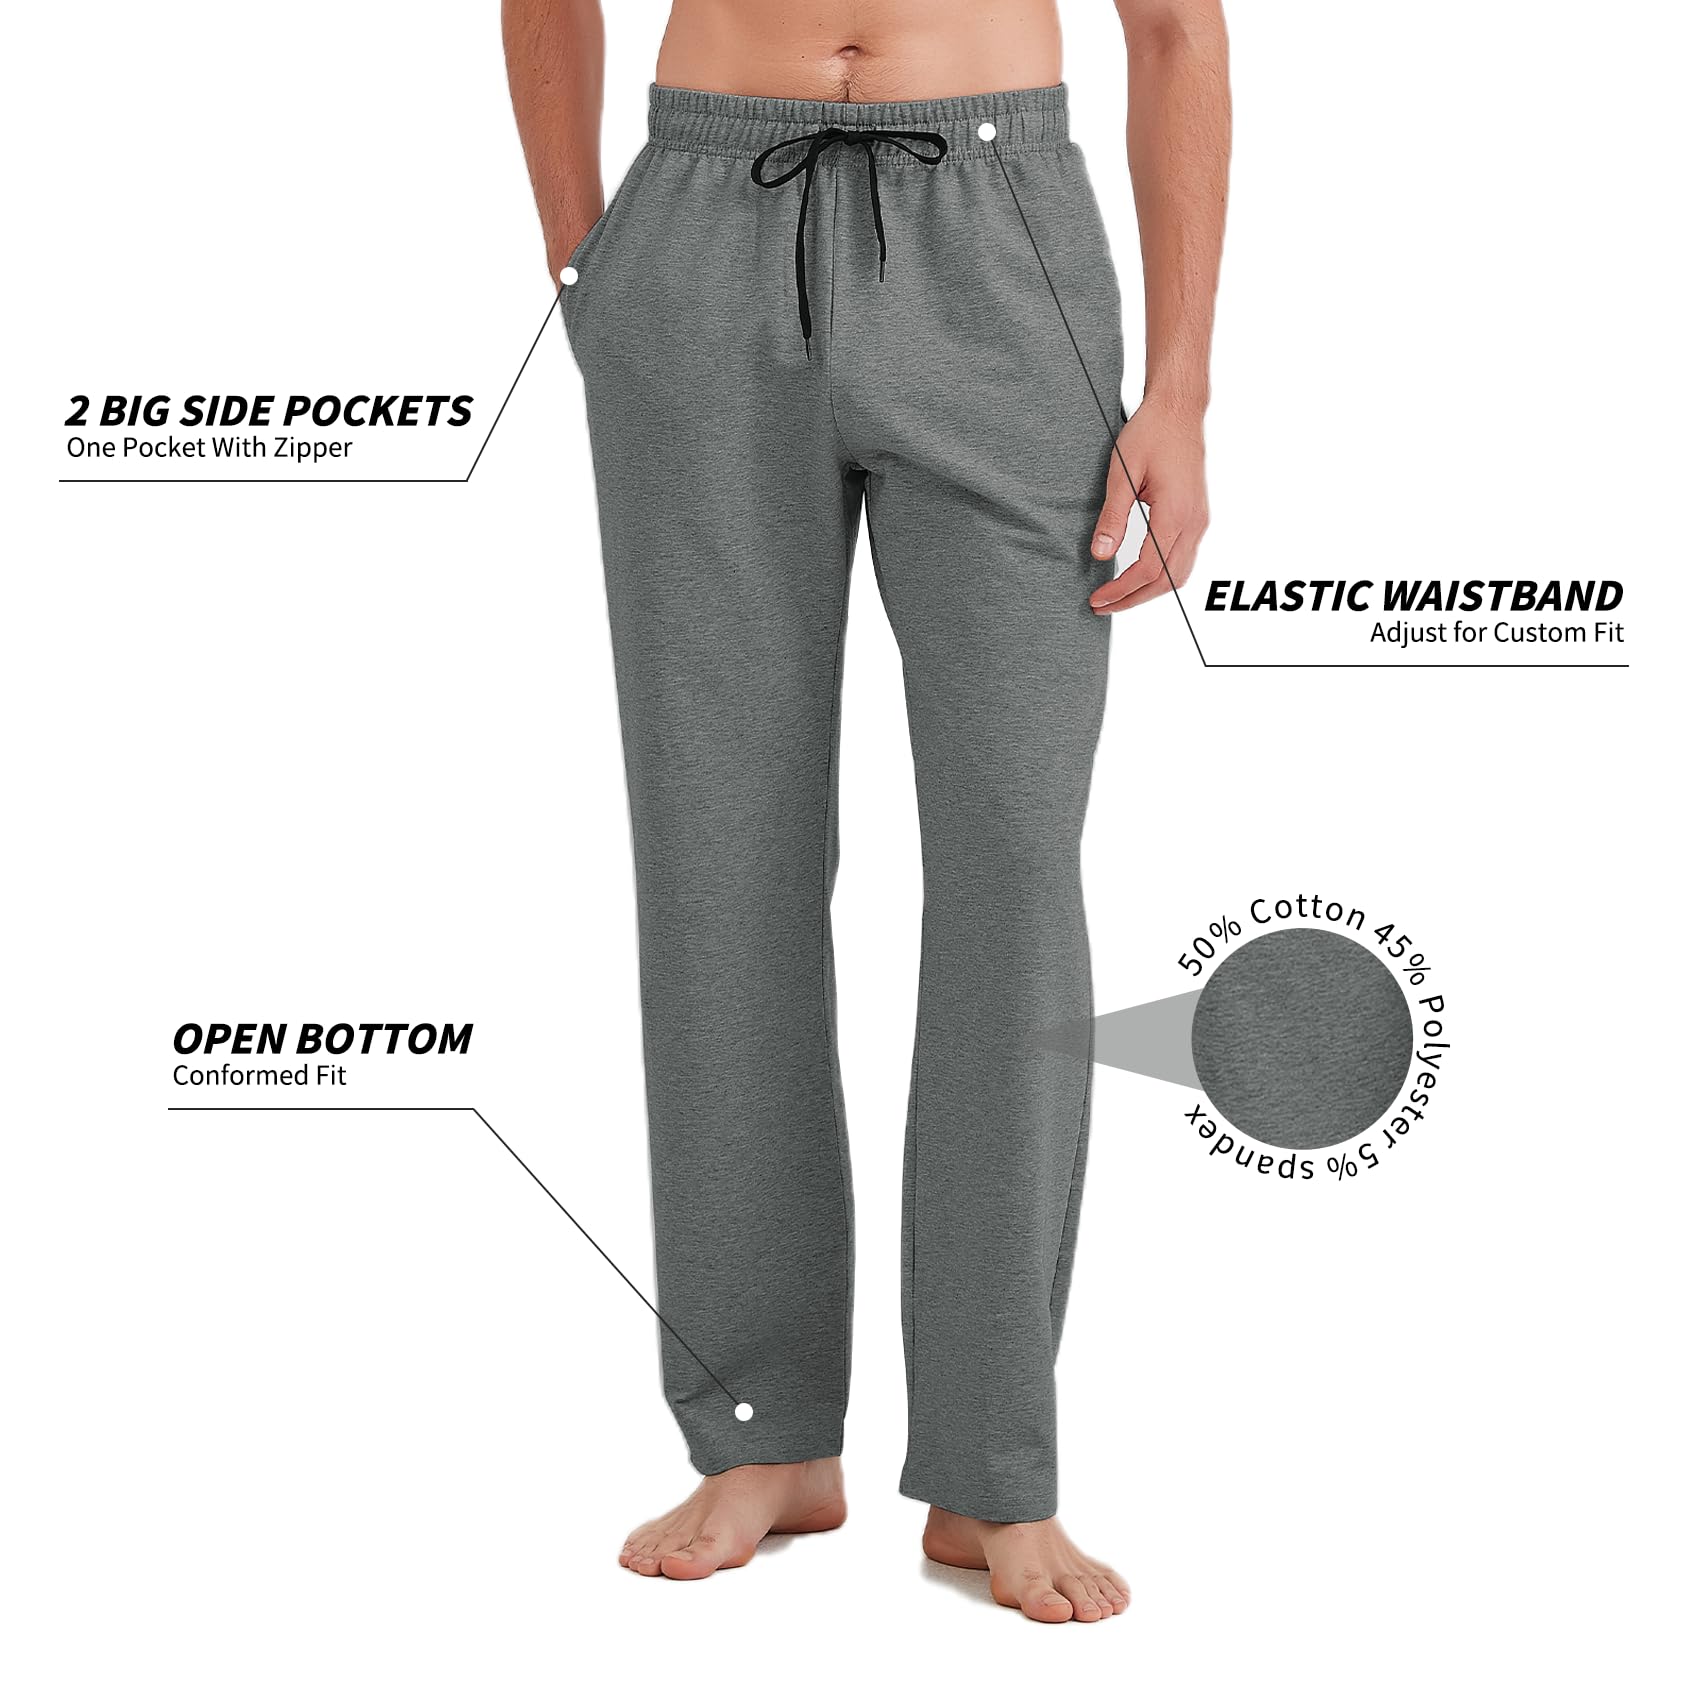 Idtswch 36 Inseam Mens Tall Sweatpants Open Bottom Joggers Casual Loose Fit Athletic Yoga Pants with Pockets Dark Gary